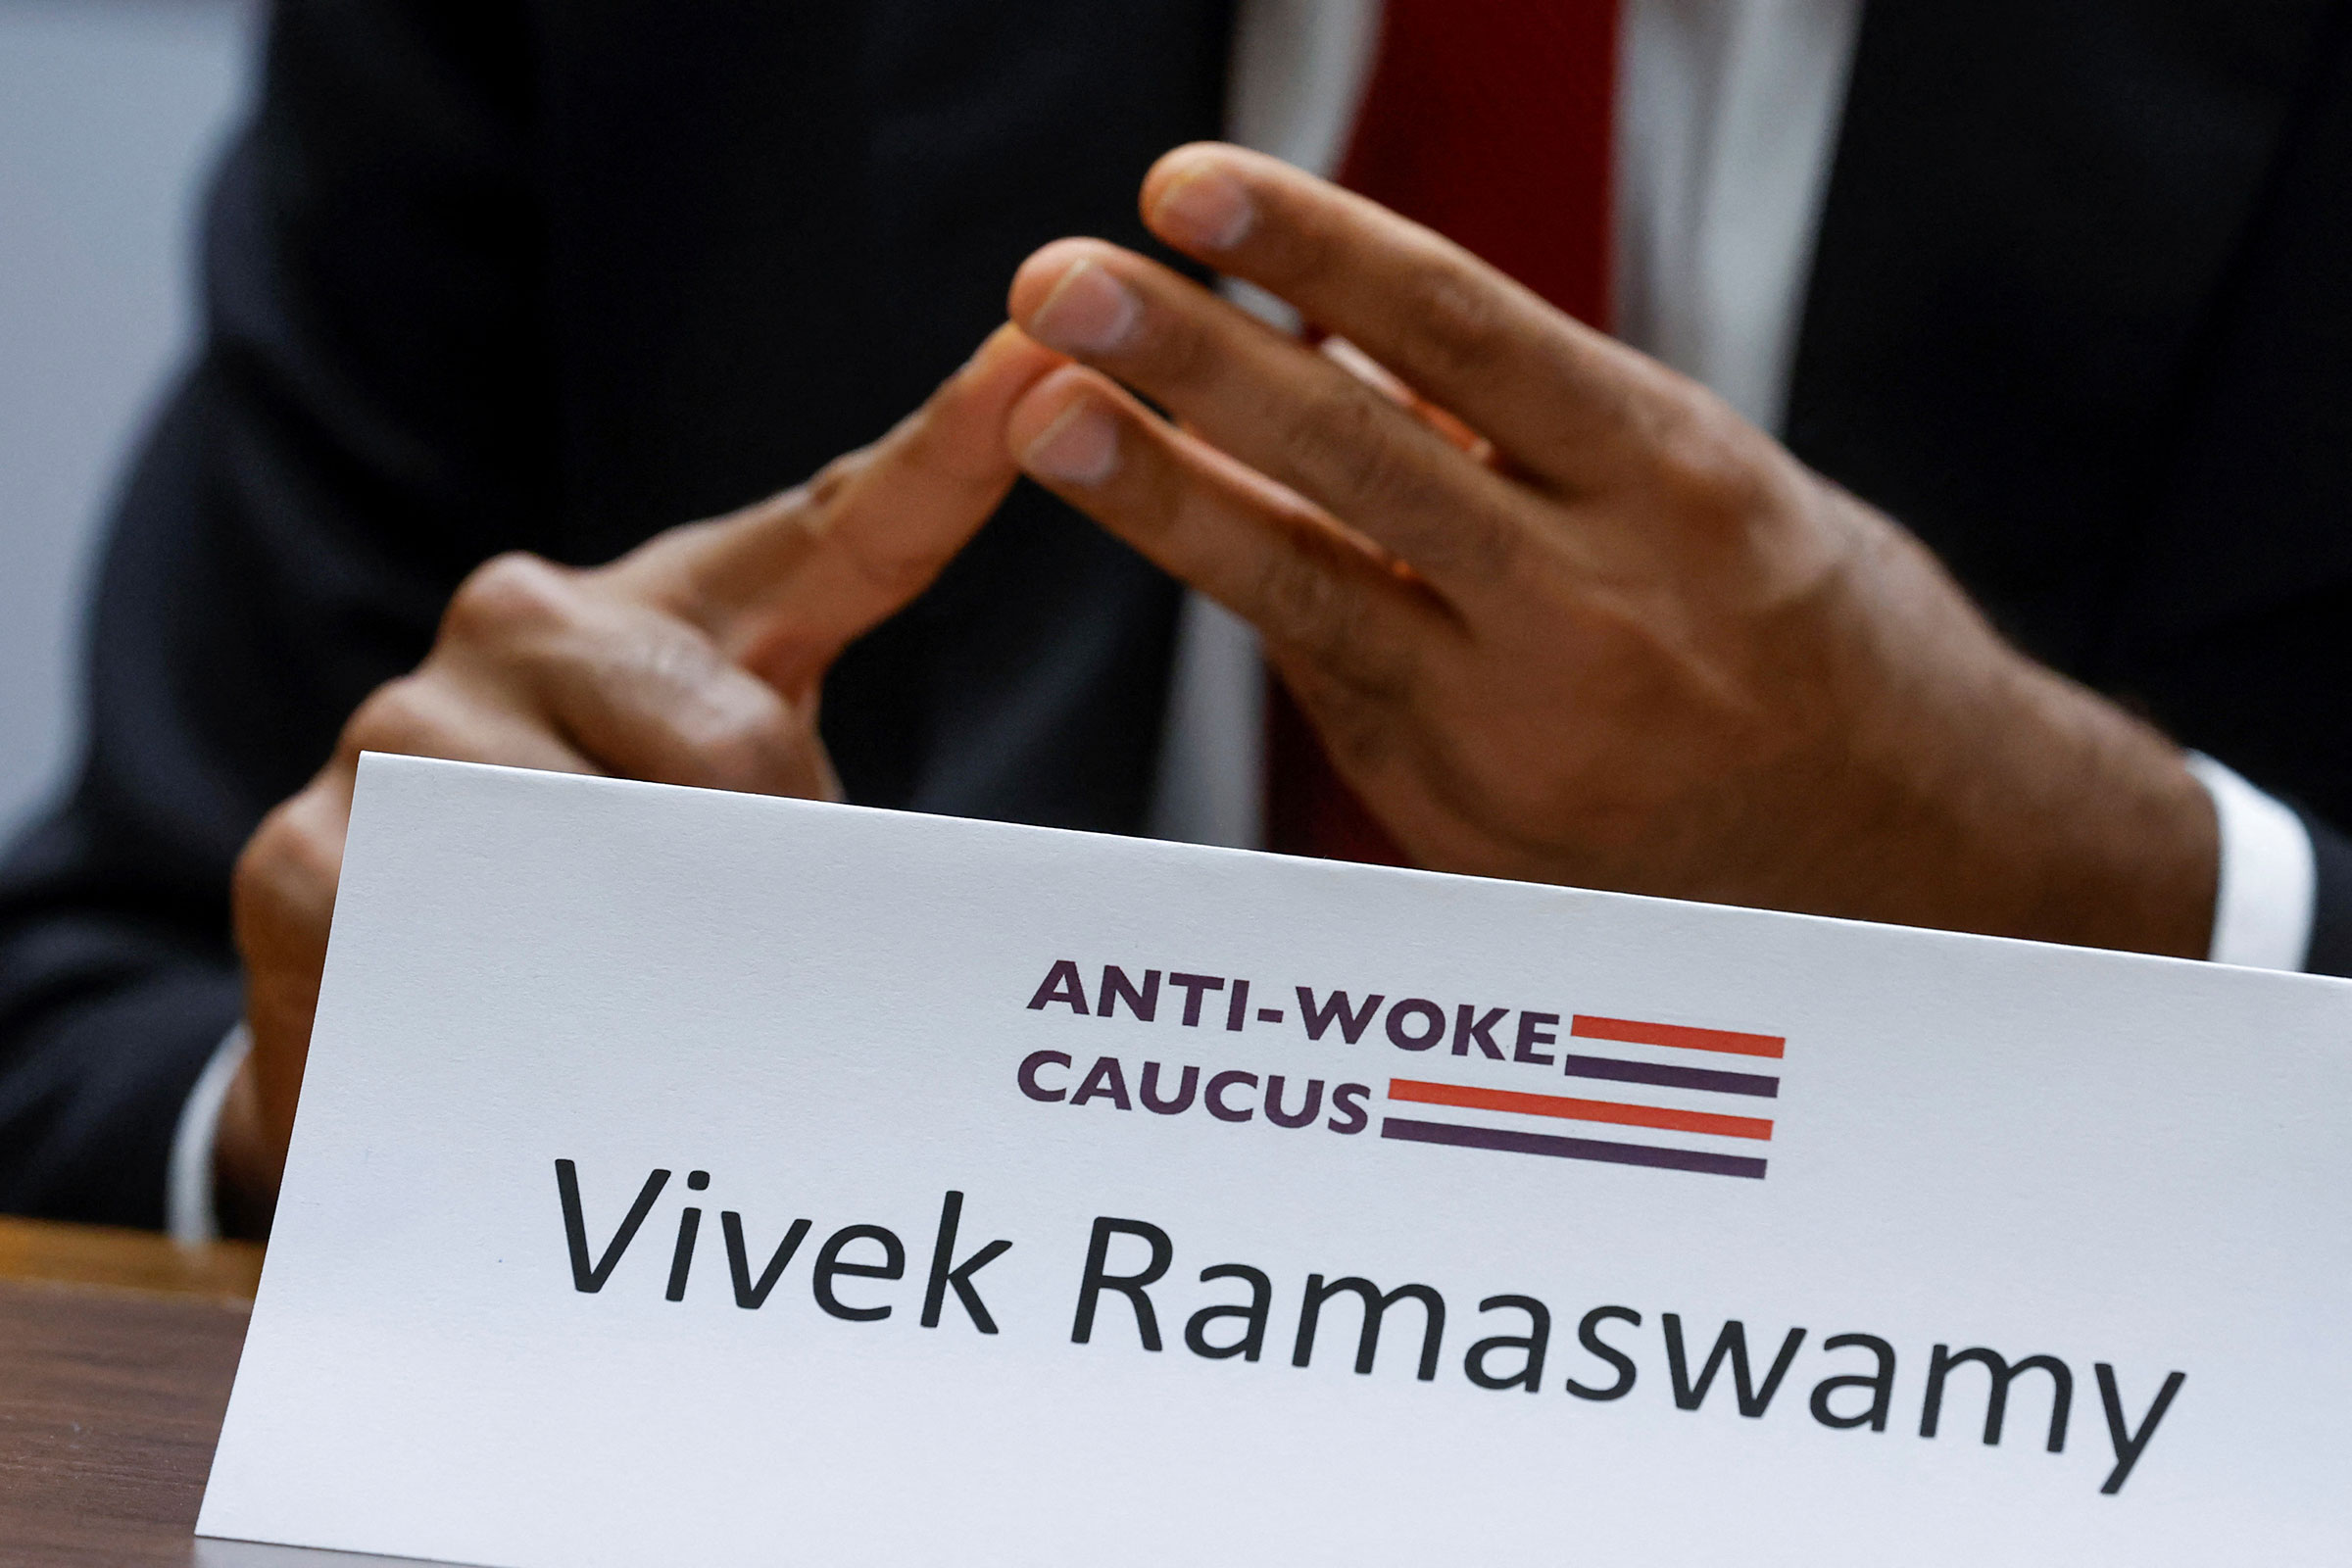 Ramaswamy speaks with reporters after meeting with members of the Anti-Woke Caucus on Capitol Hill in Washington, on June 22, 2023. (Jonathan Ernst—Reuters)